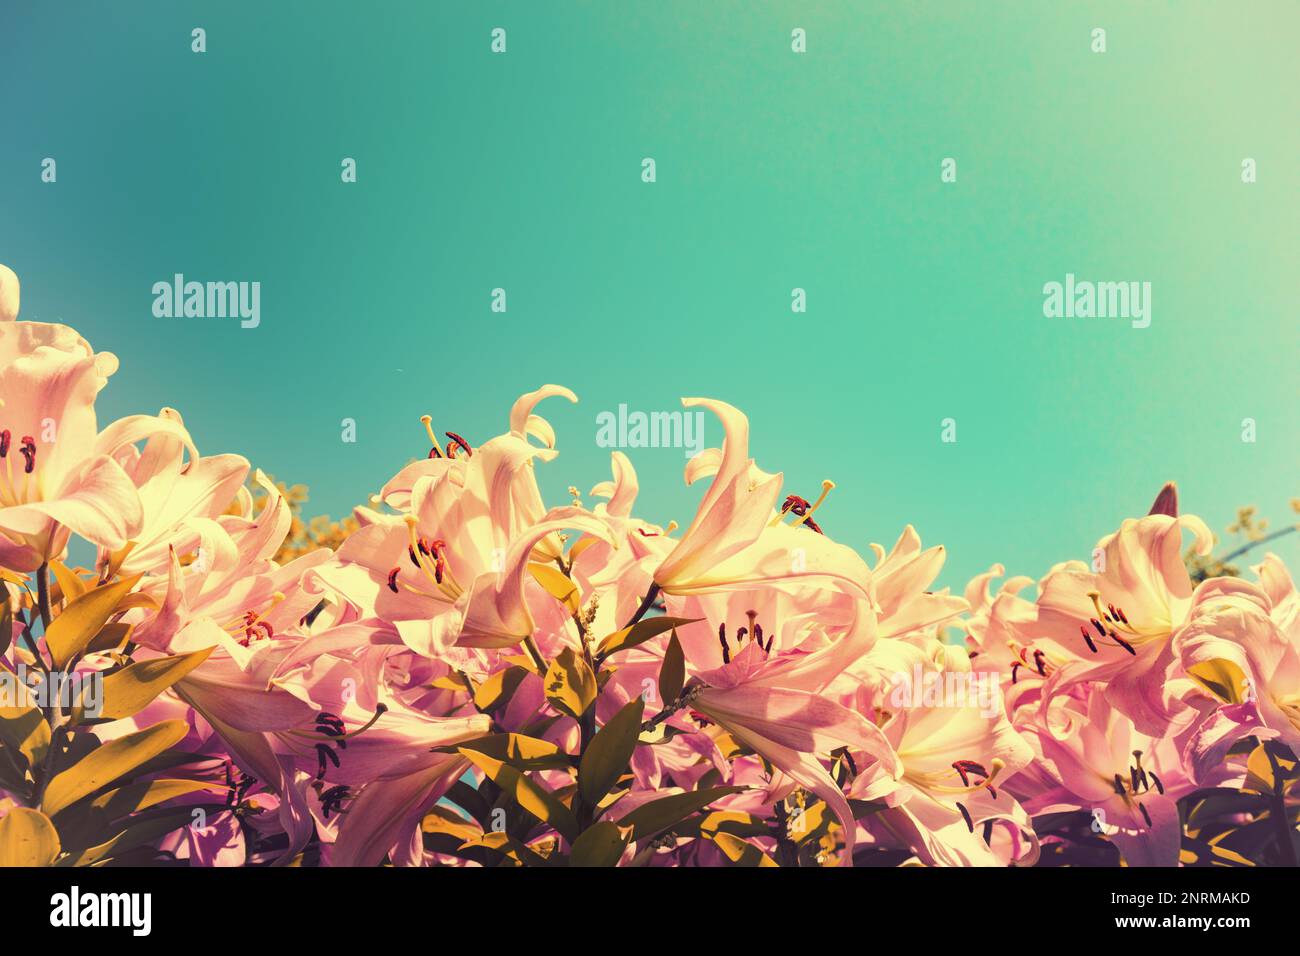 Flowering white and rose lilies against blue sky with the sun Stock Photo